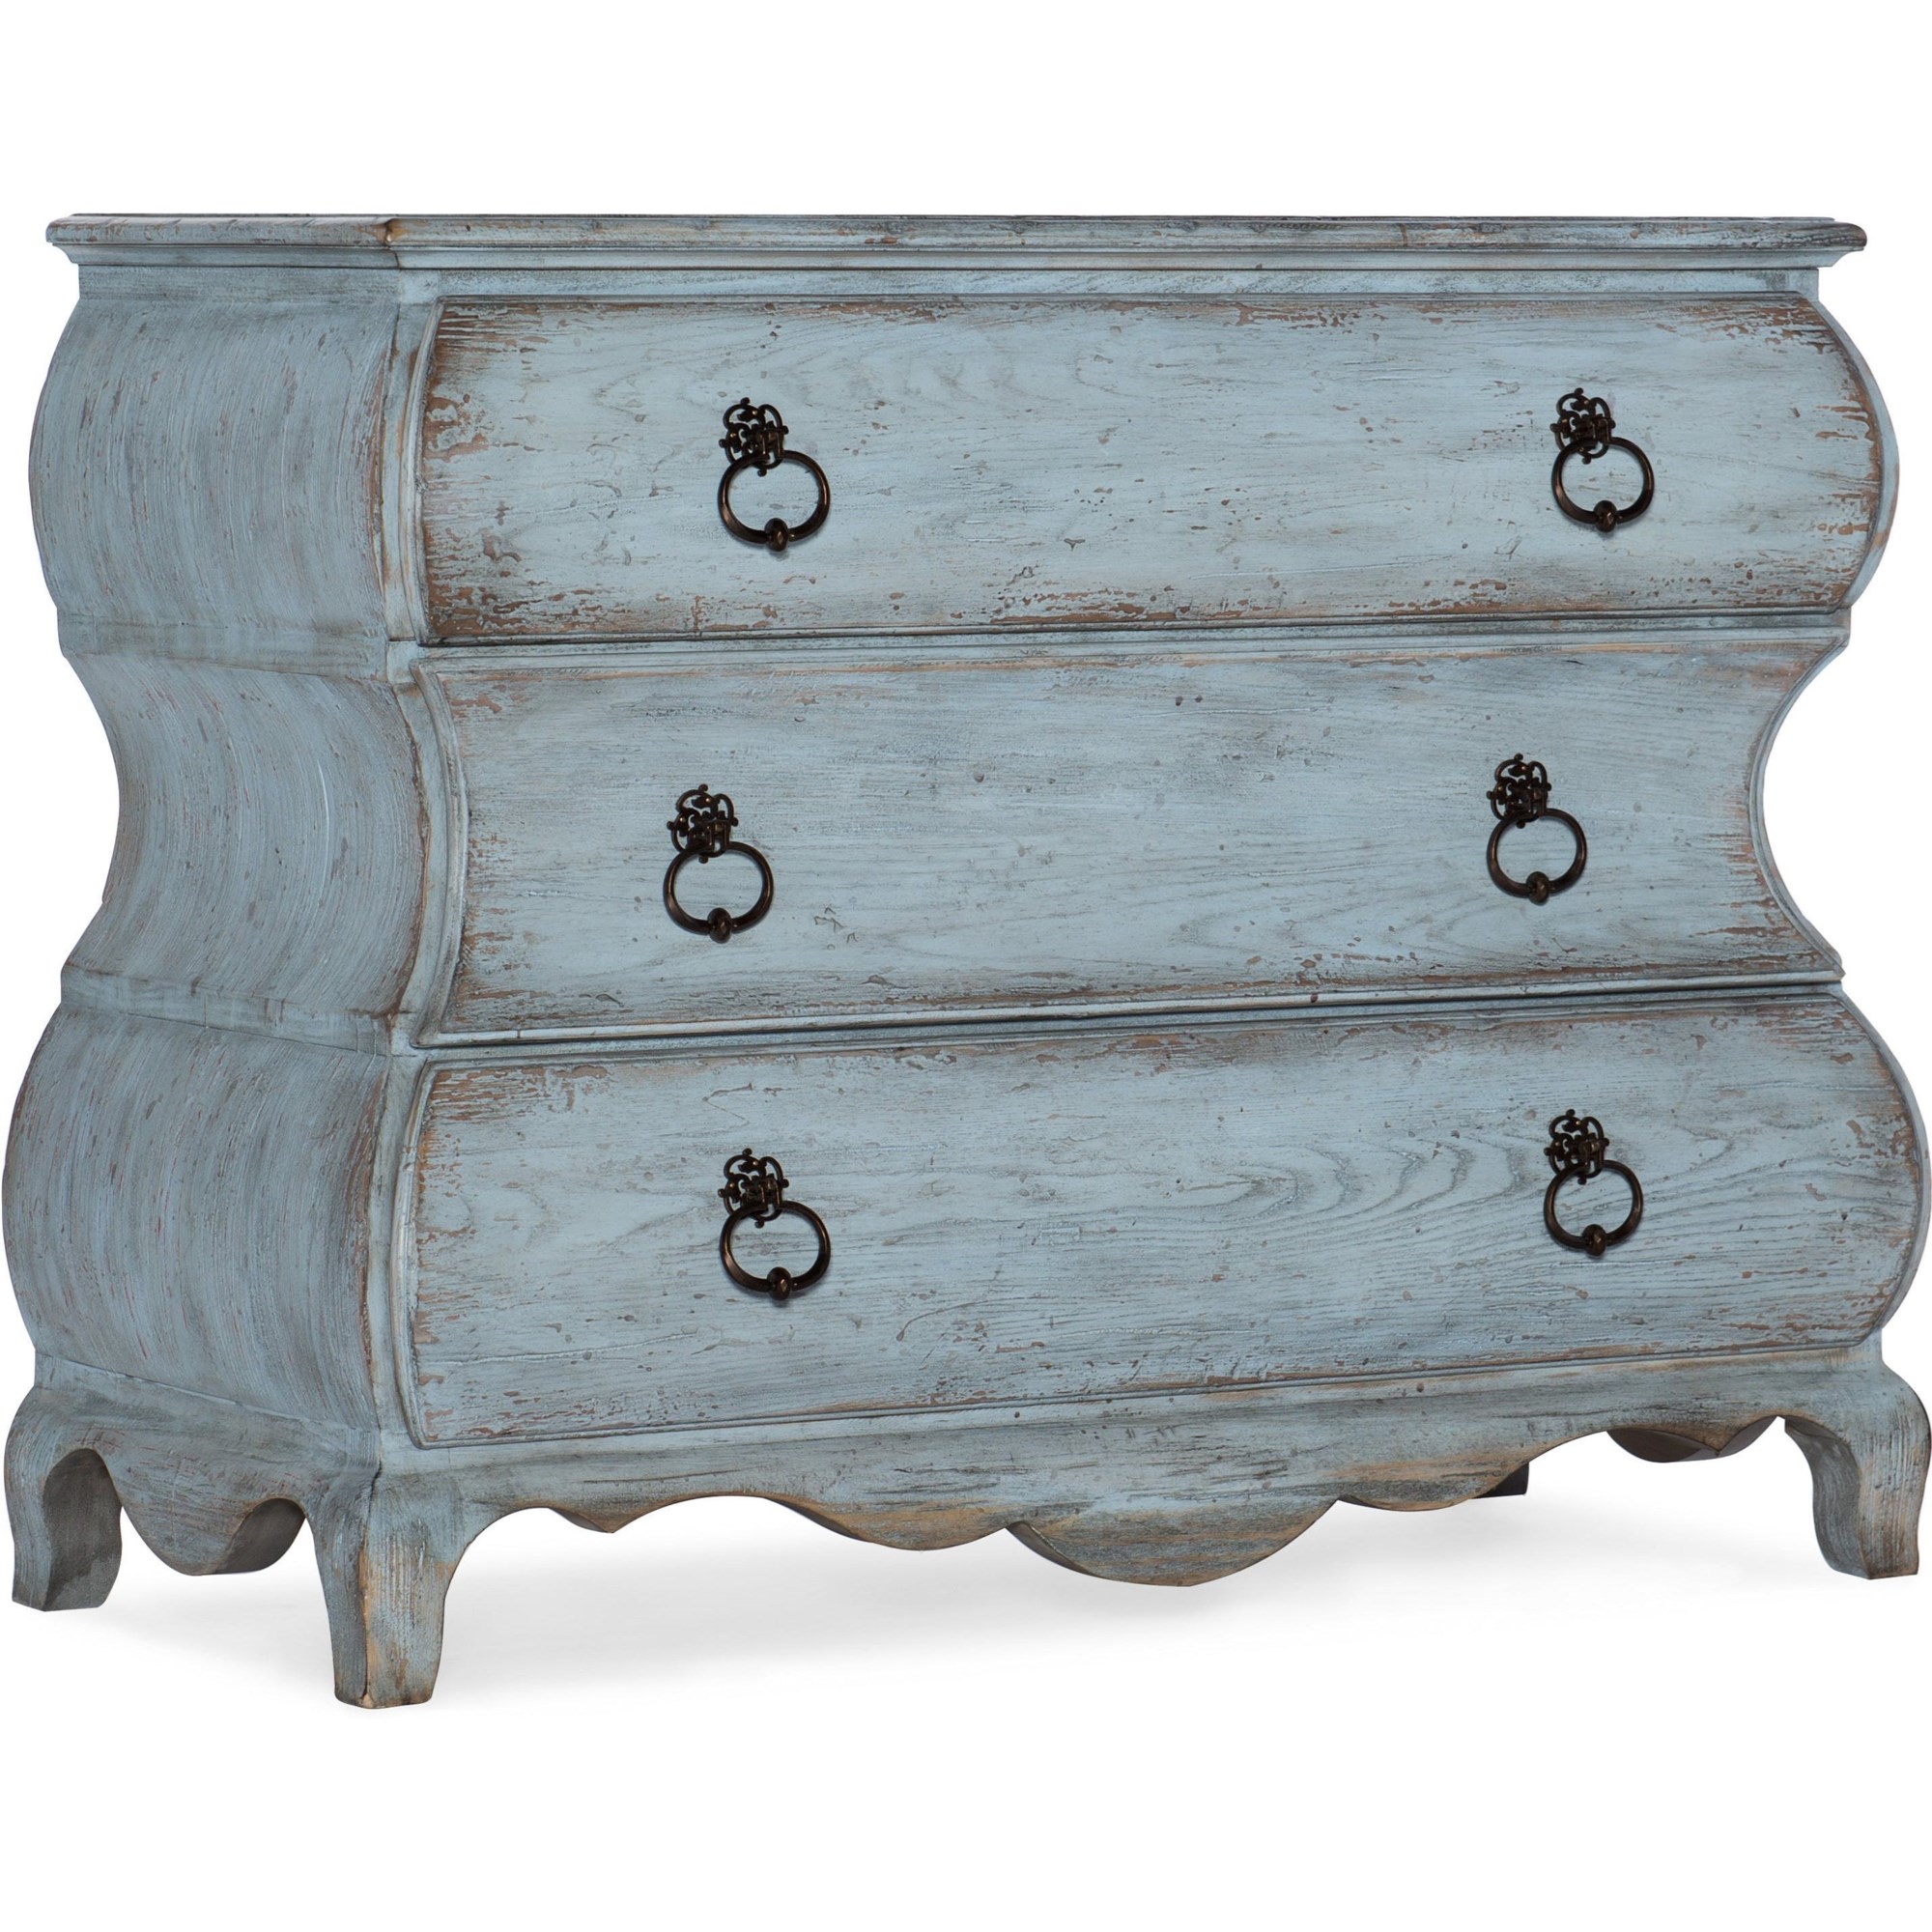 SOLD Blue Shabby Chic Chalk Painted Antique Dresser Distressed Painted  Dresser Three Drawers French Provincial Painted Antique Dresser 